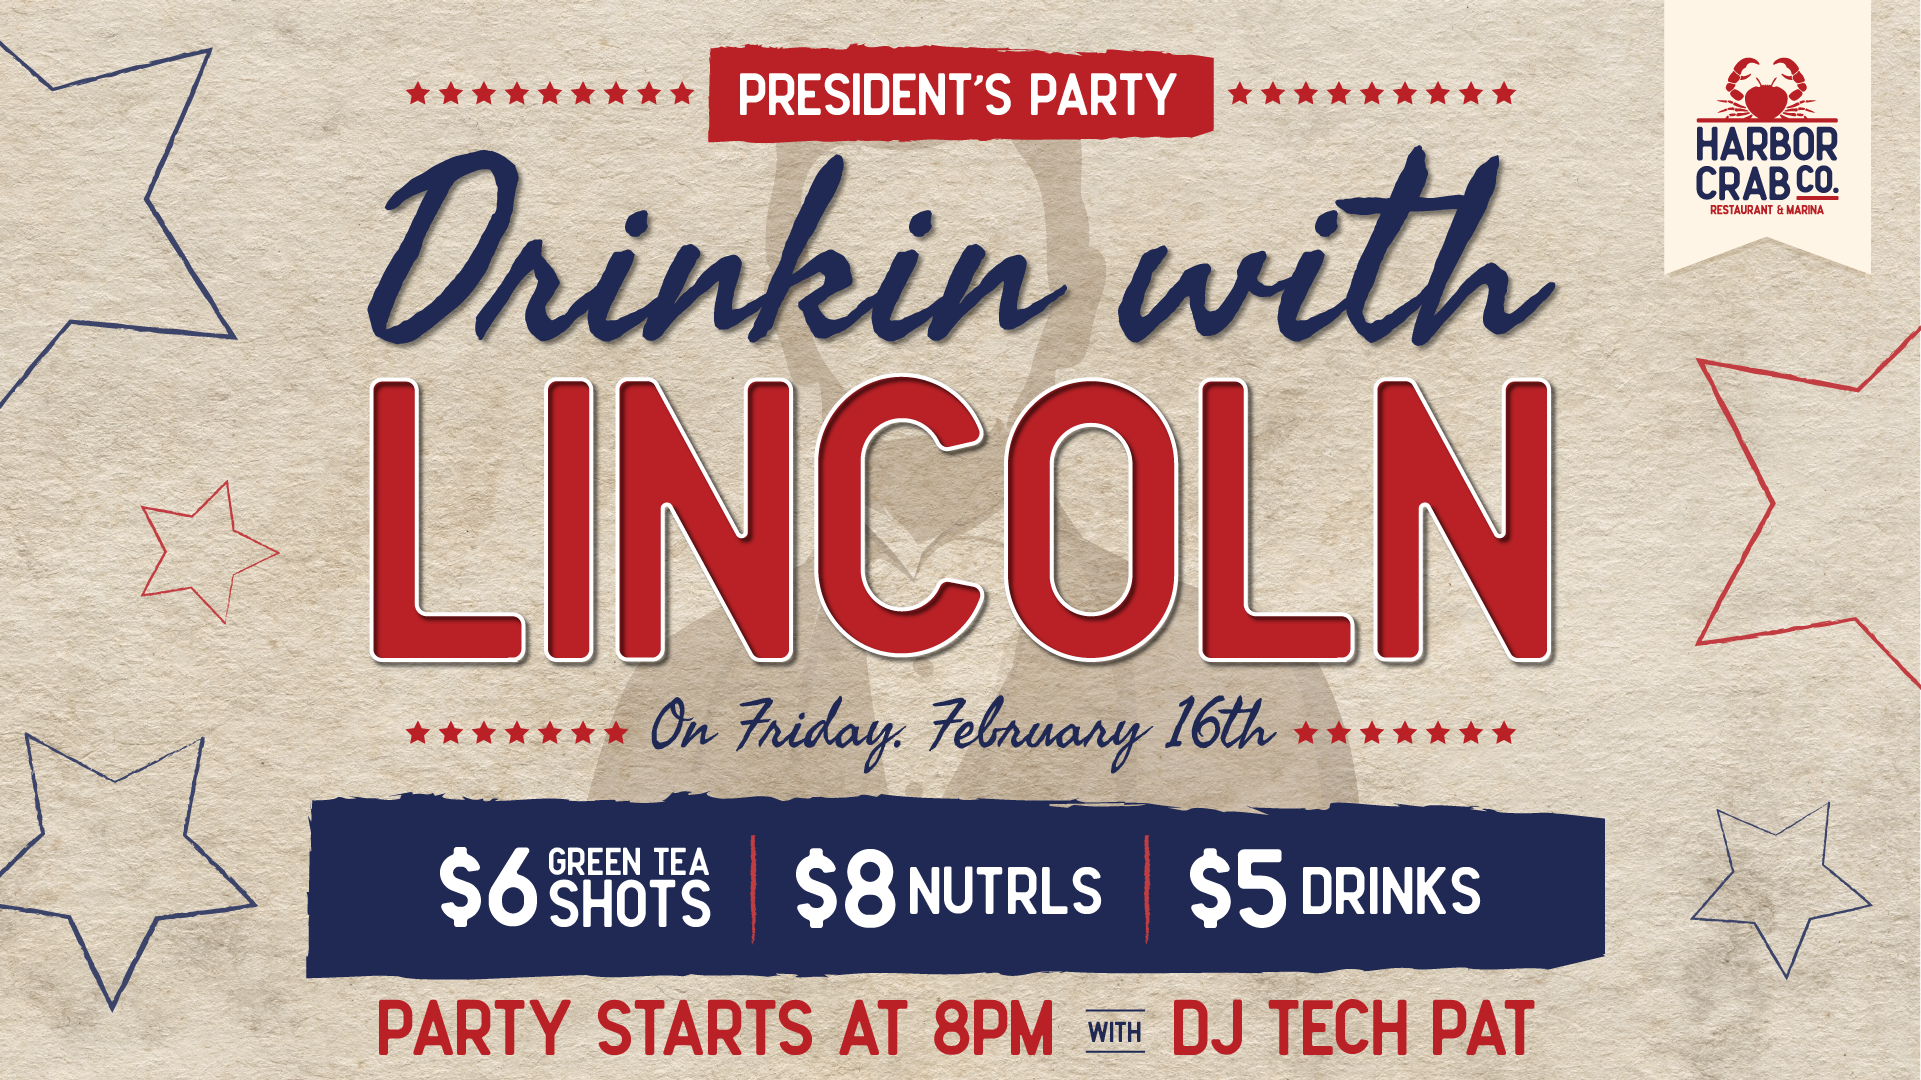 Harbor Crab Co.'s President’s Party flyer with 'Drinkin with Lincoln' theme for Friday, February 16th, starting at 8 PM with DJ Tech Pat, including drink deals